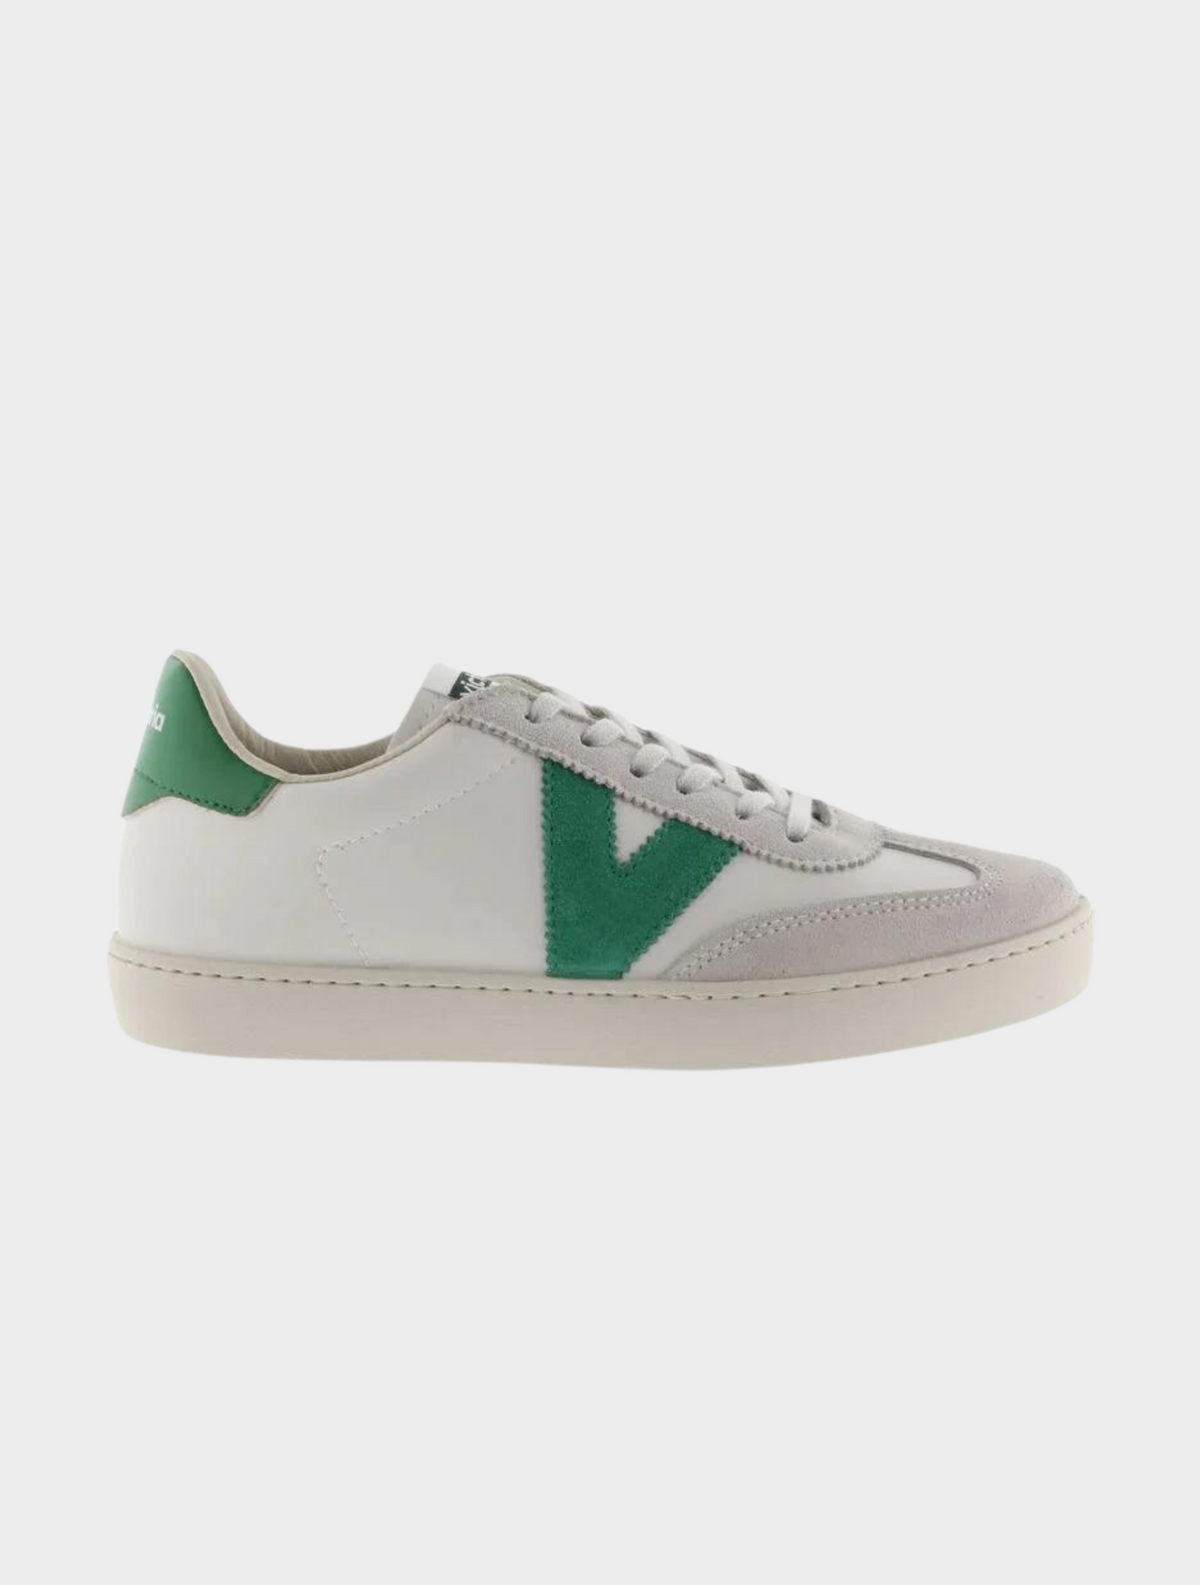 White leather pumps with suede toe flat rubber sole and contrast green "V" on the outer side and heel tab